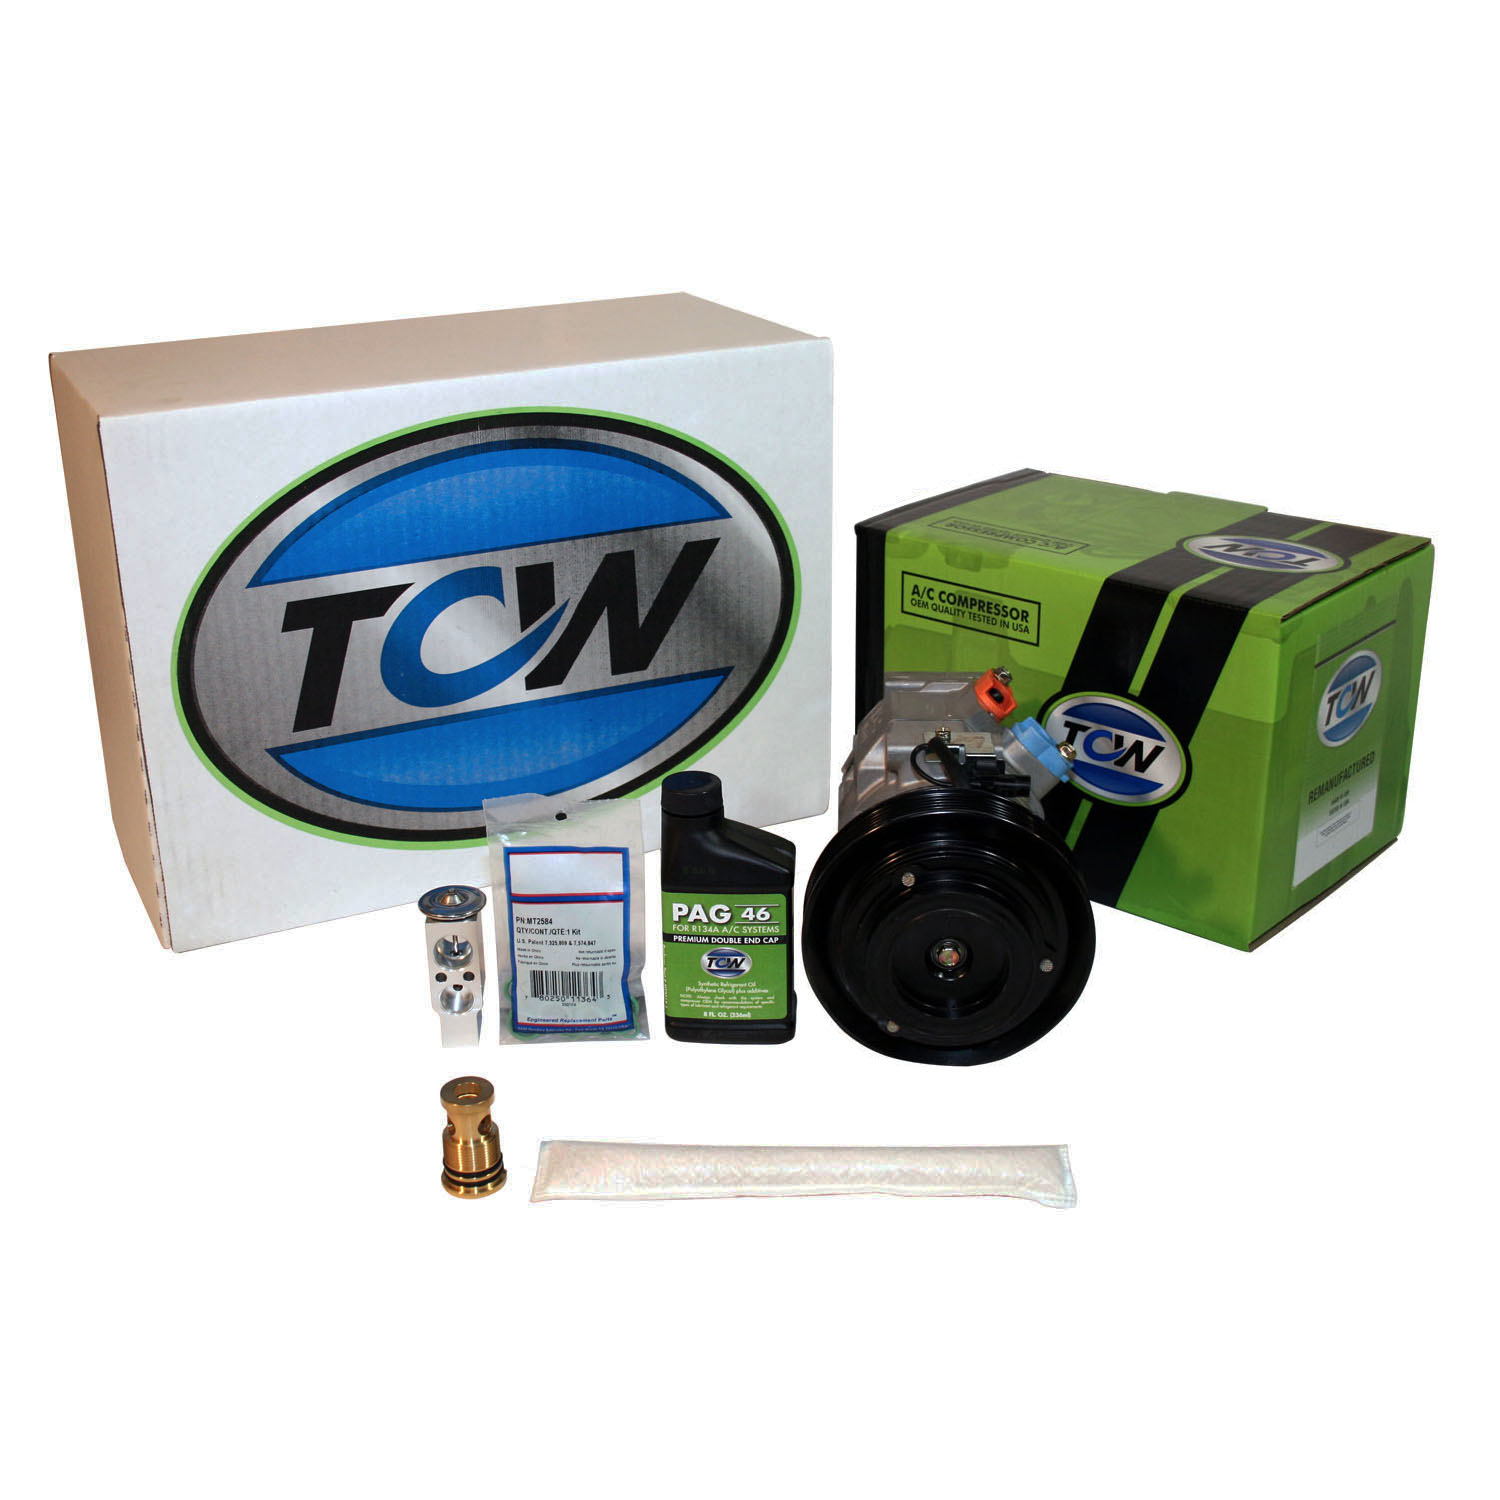 TCW Vehicle A/C Kit K1000269R Remanufactured Product Image field_60b6a13a6e67c